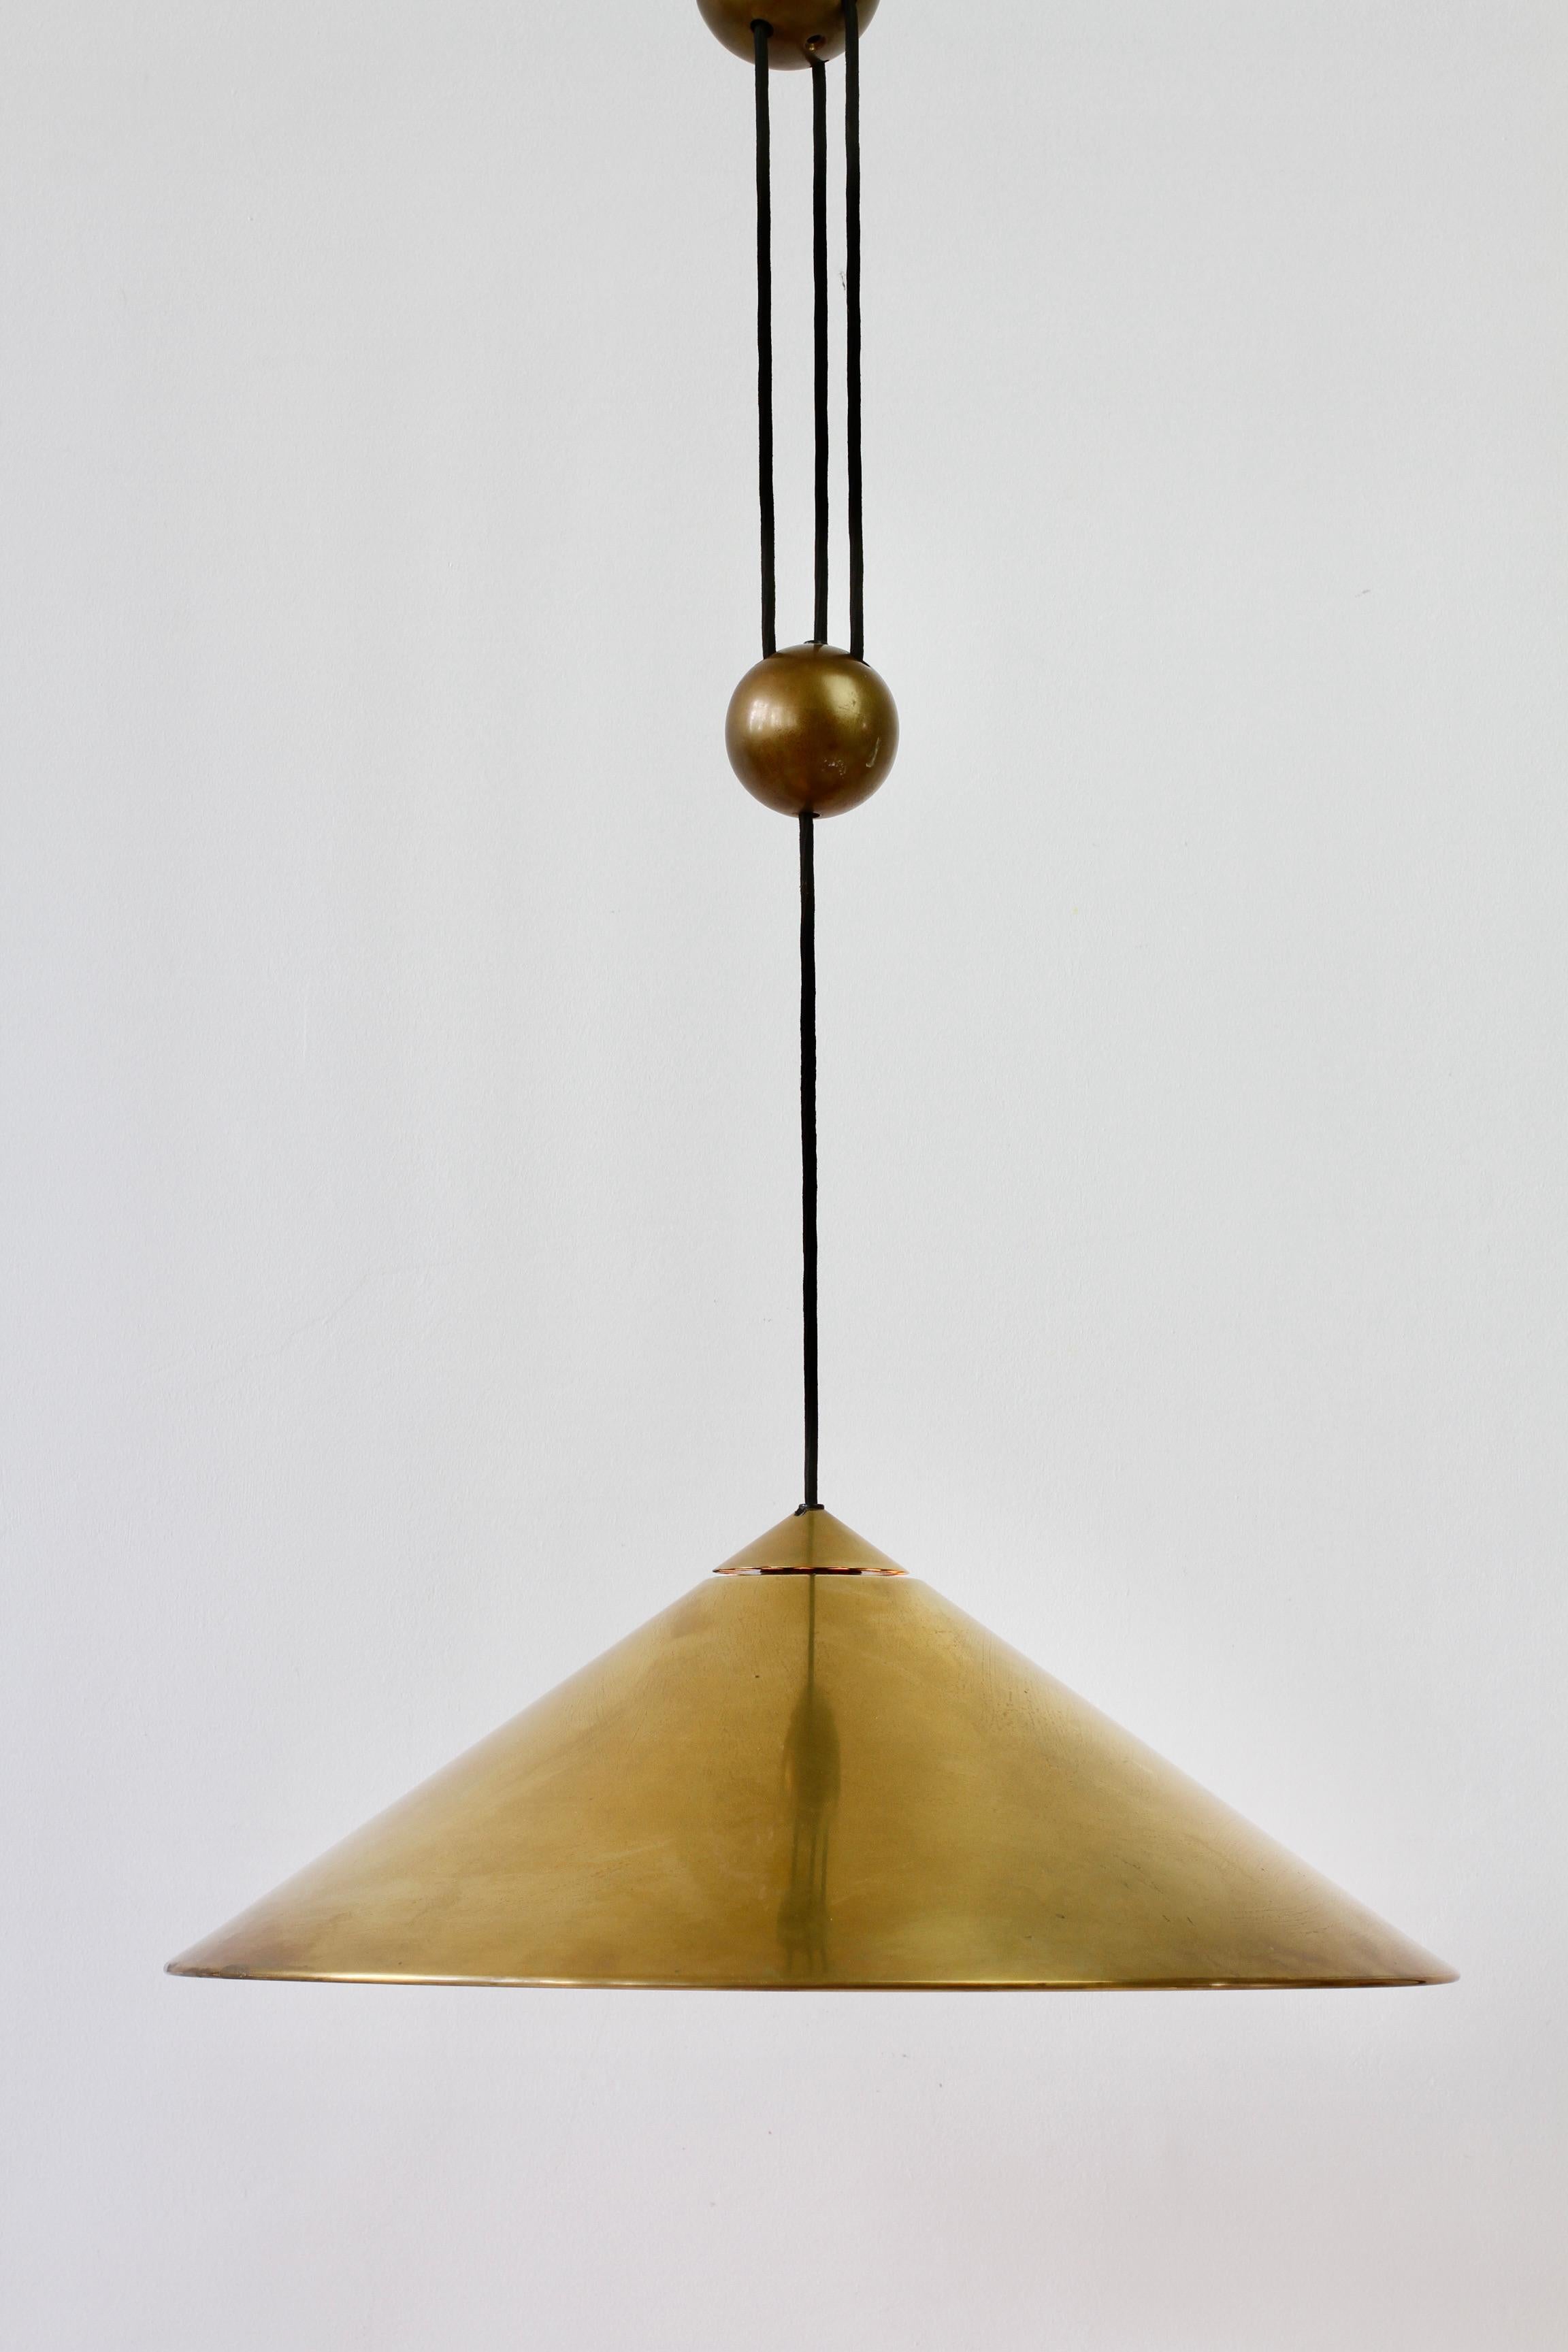 Very rare and elegant Mid-Century Modern vintage German made large polished brass adjustable counterweight hanging pendant light or lamp model 'Keos' designed and manufactured by Florian Schulz circa early 1970s. Featuring polished brass (now with